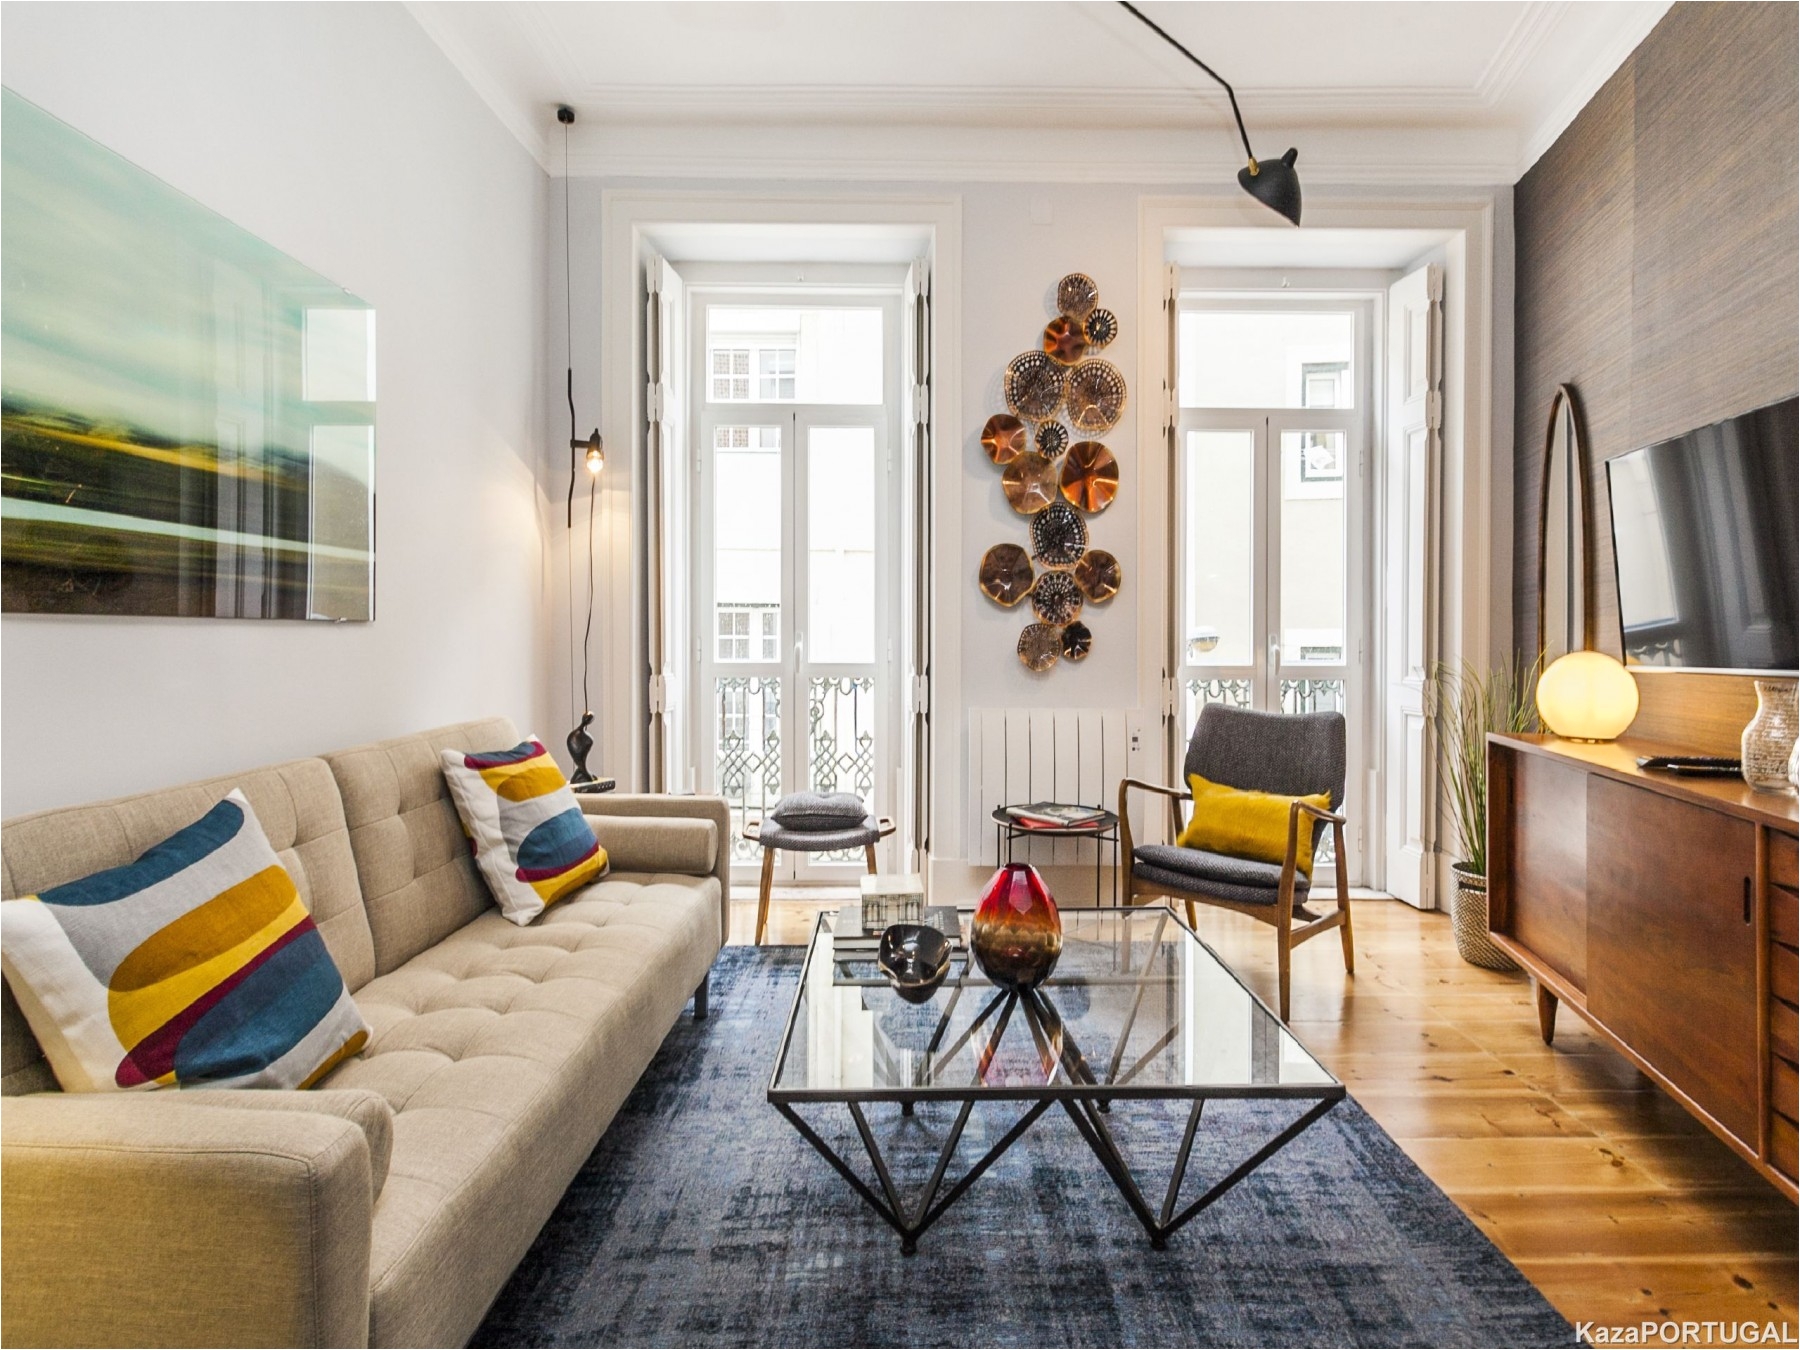 accomodates a max of 5 fantastic apartment in the best location to discover lisbon the apartment is situated a few steps of chiado largo do carmo